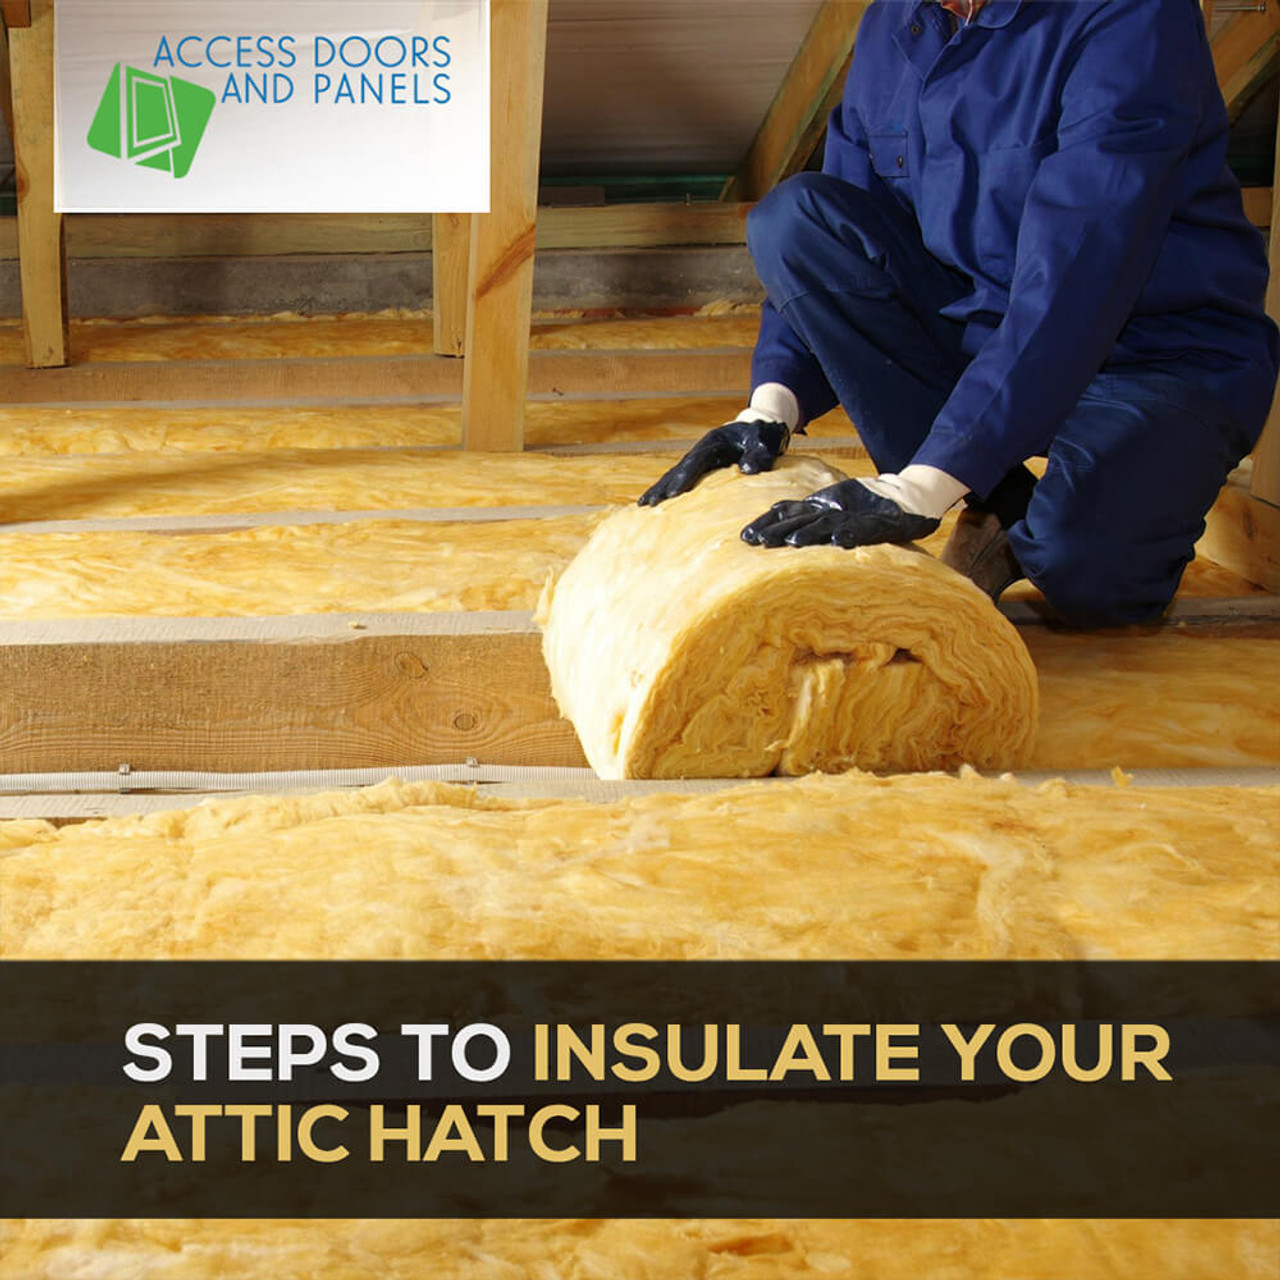 Steps to Insulate Your Attic Hatch